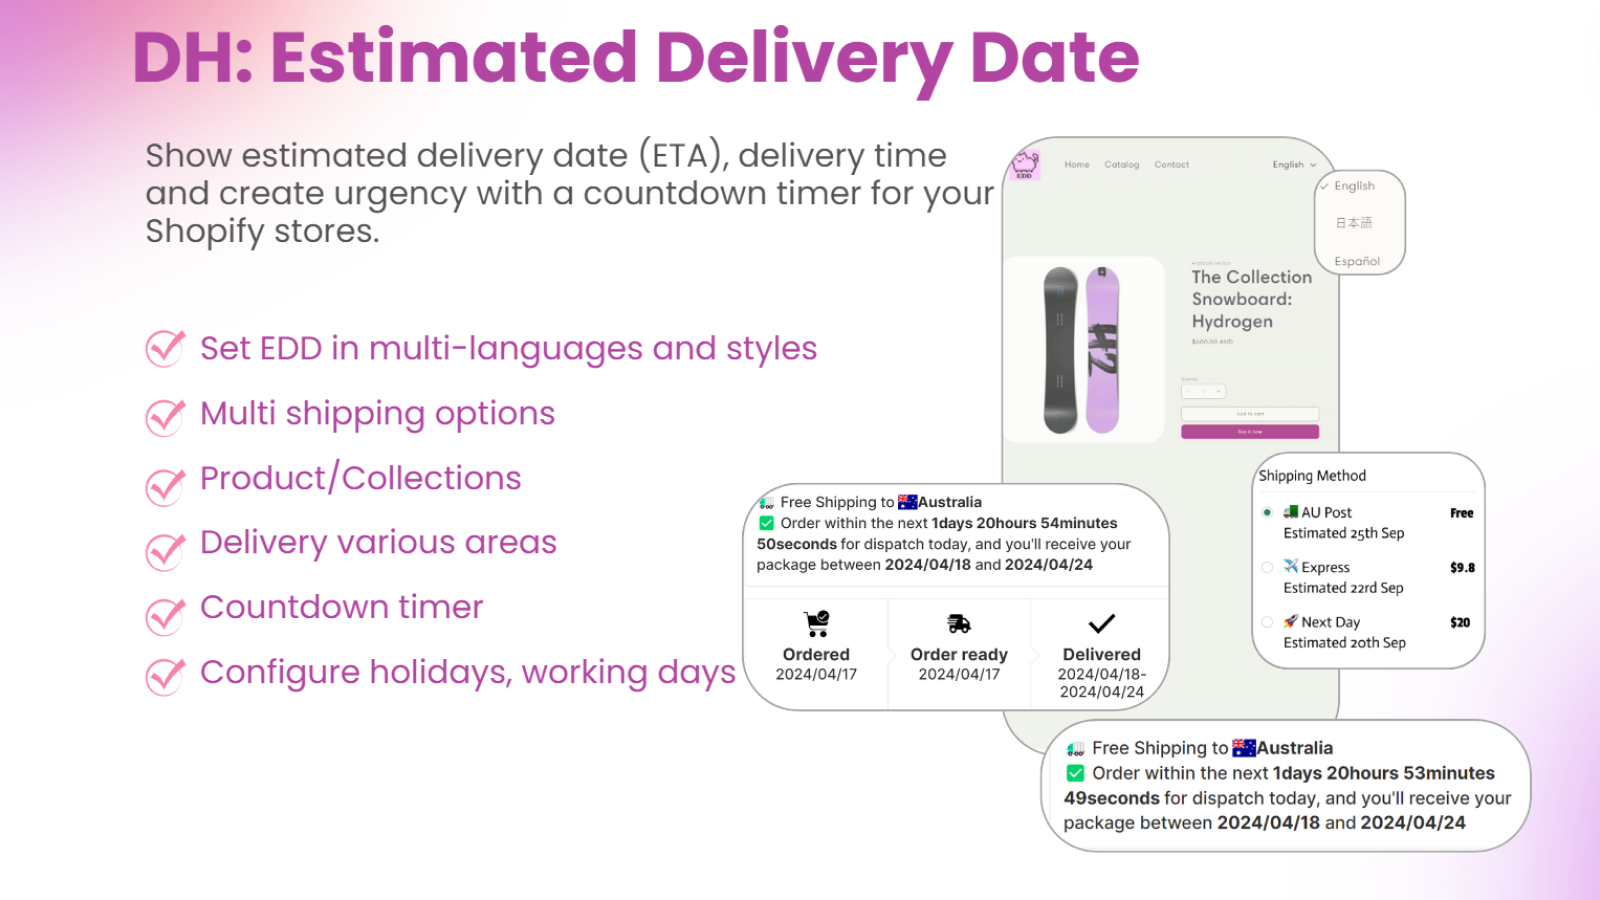 DH: Estimated Delivery Date Screenshot